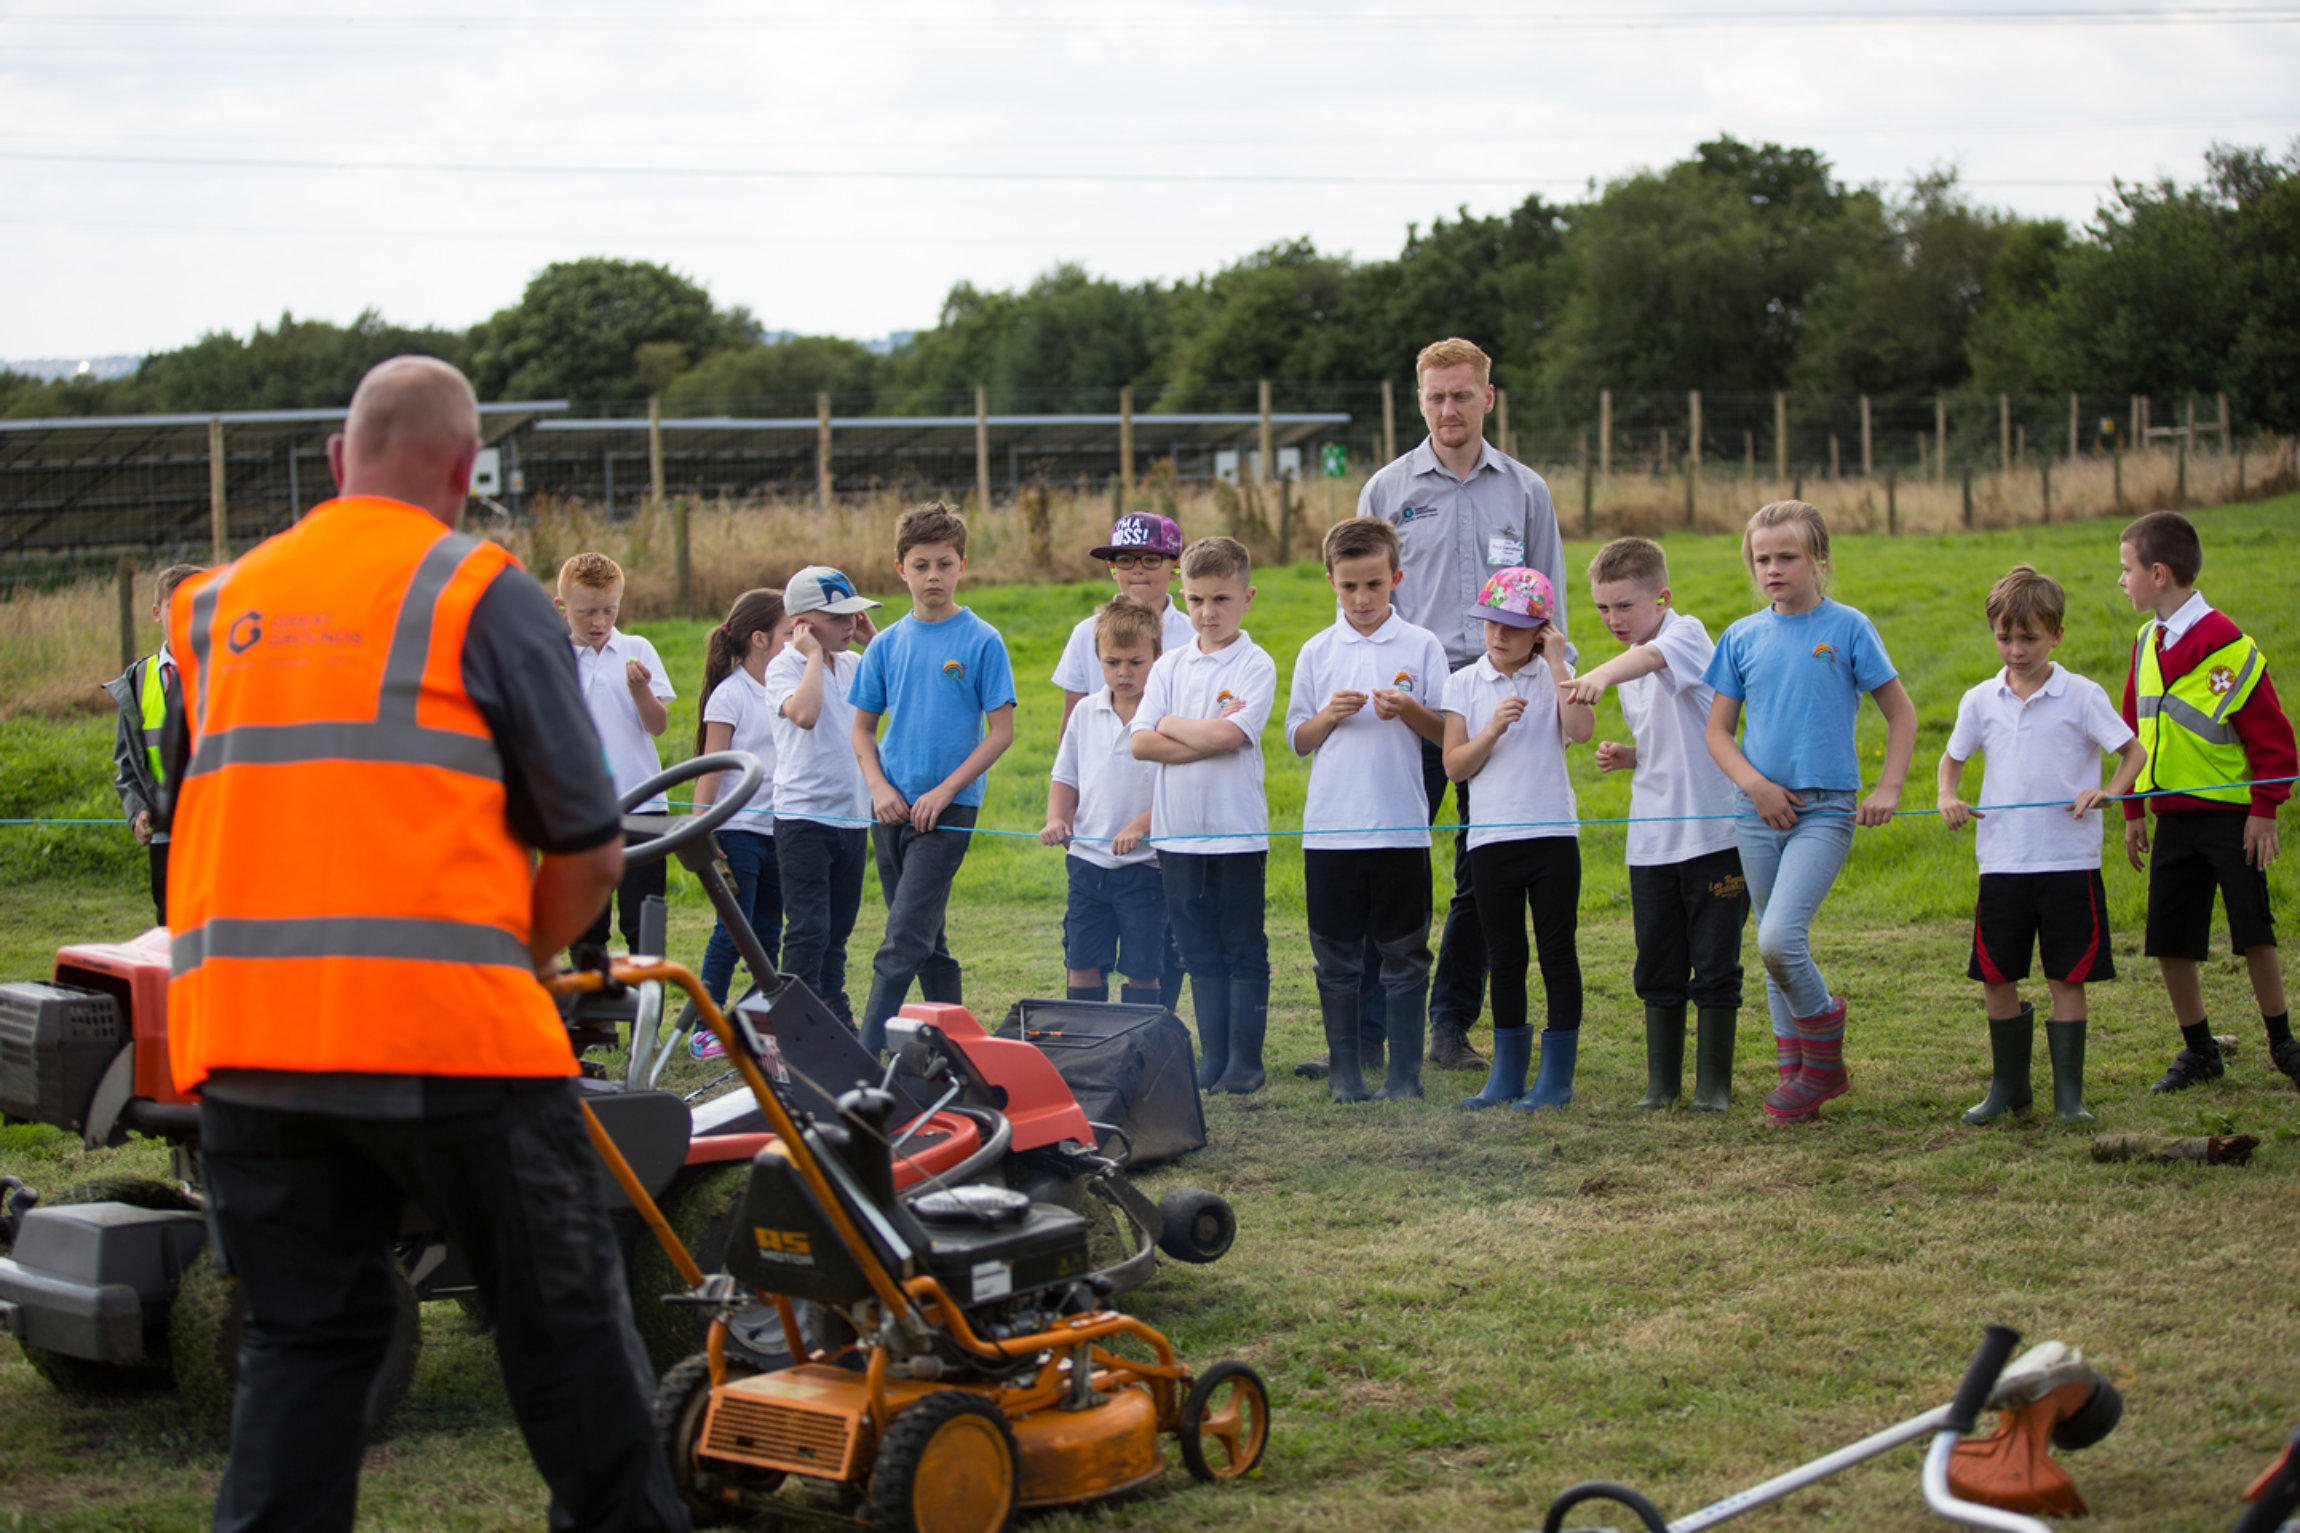 Grounds Maintenance  â€“ An opportunity to Learn